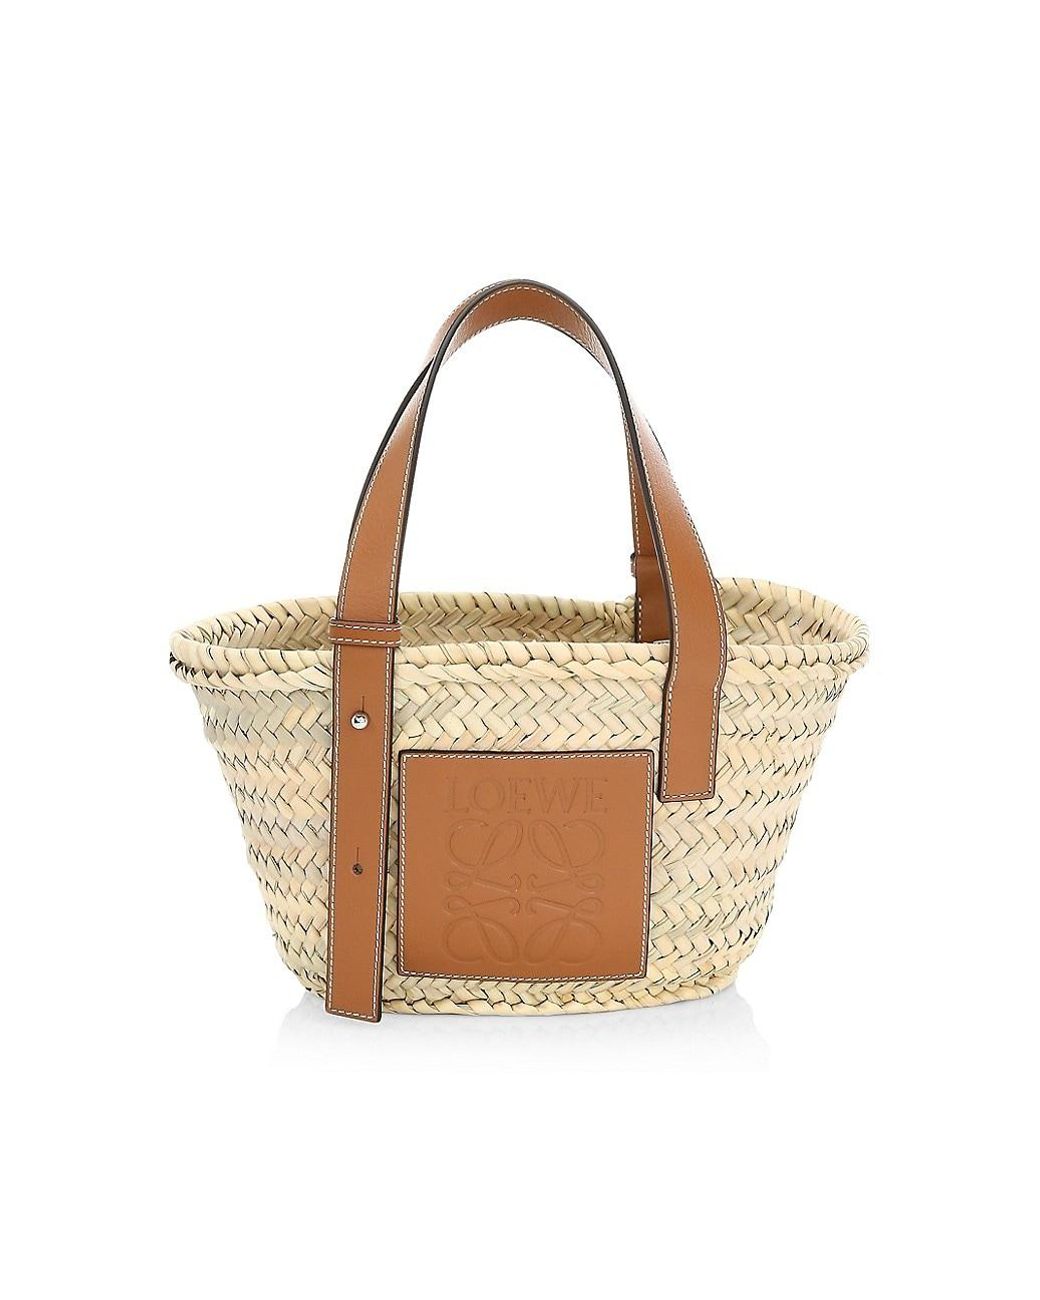 Loewe Mini Leather-trimmed Woven Basket Bag in Natural Tan (Brown) - Lyst